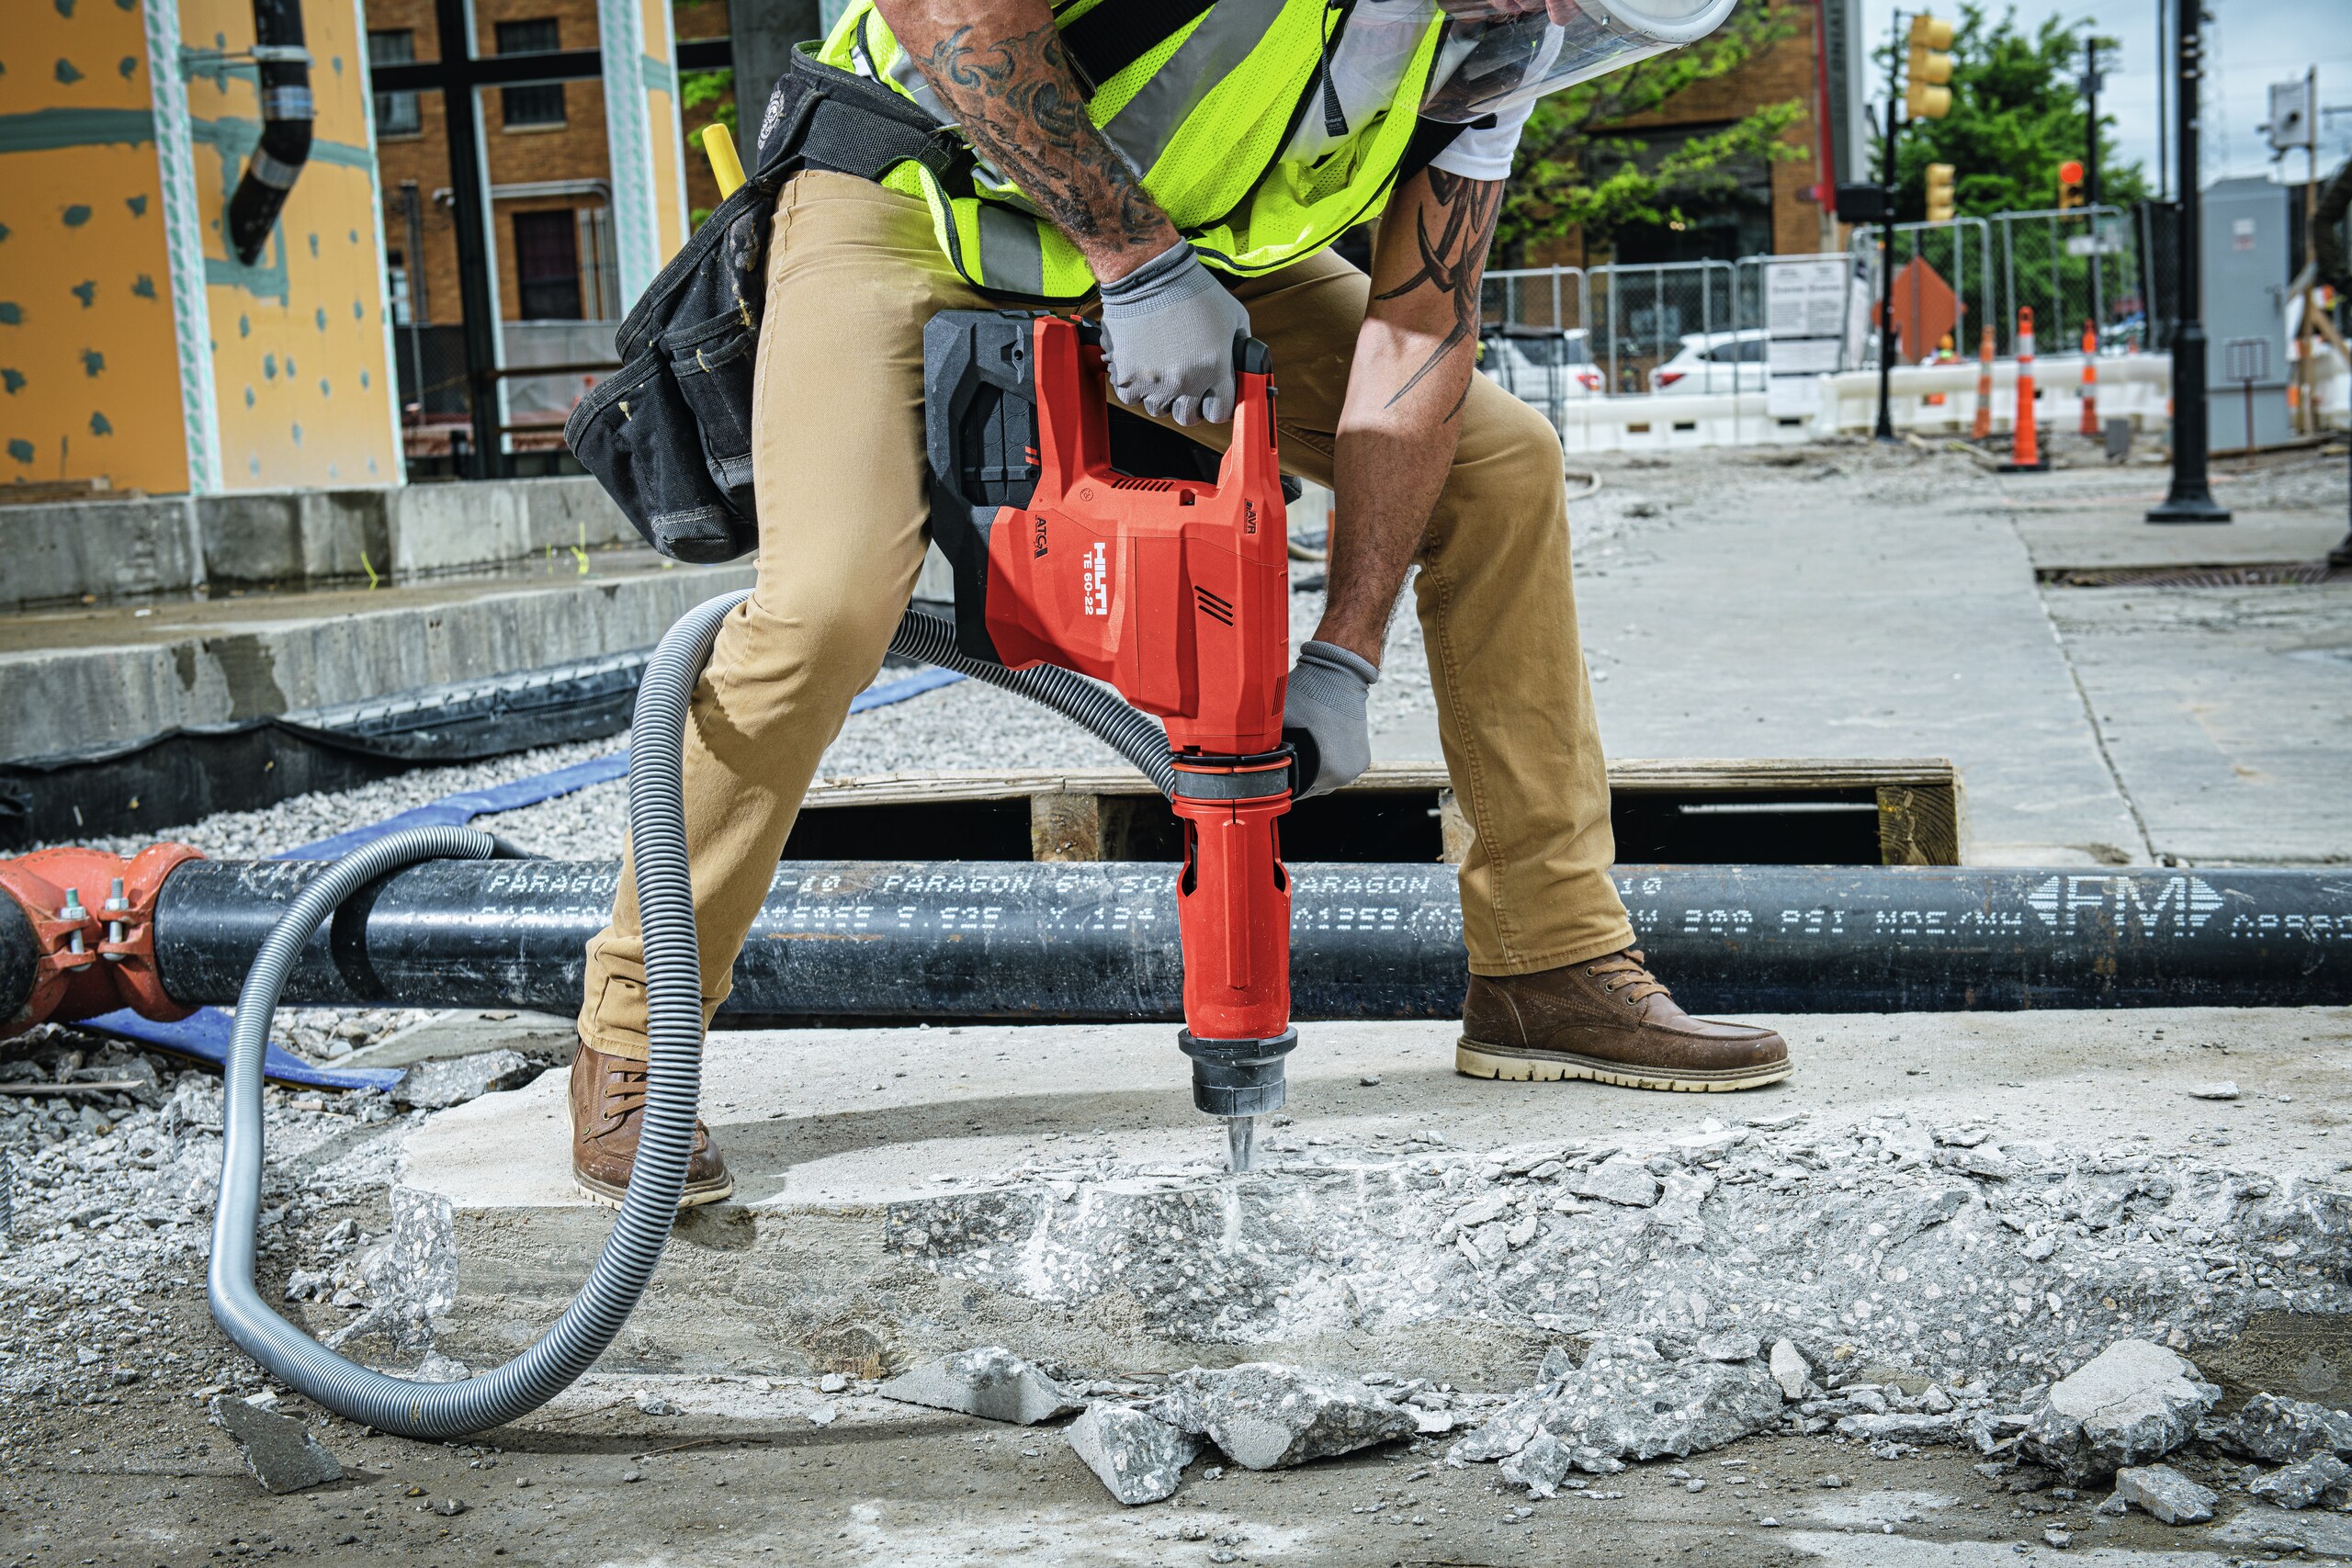 Worker drilling into concrete with the new TE 60-22 and an attached dust removal system